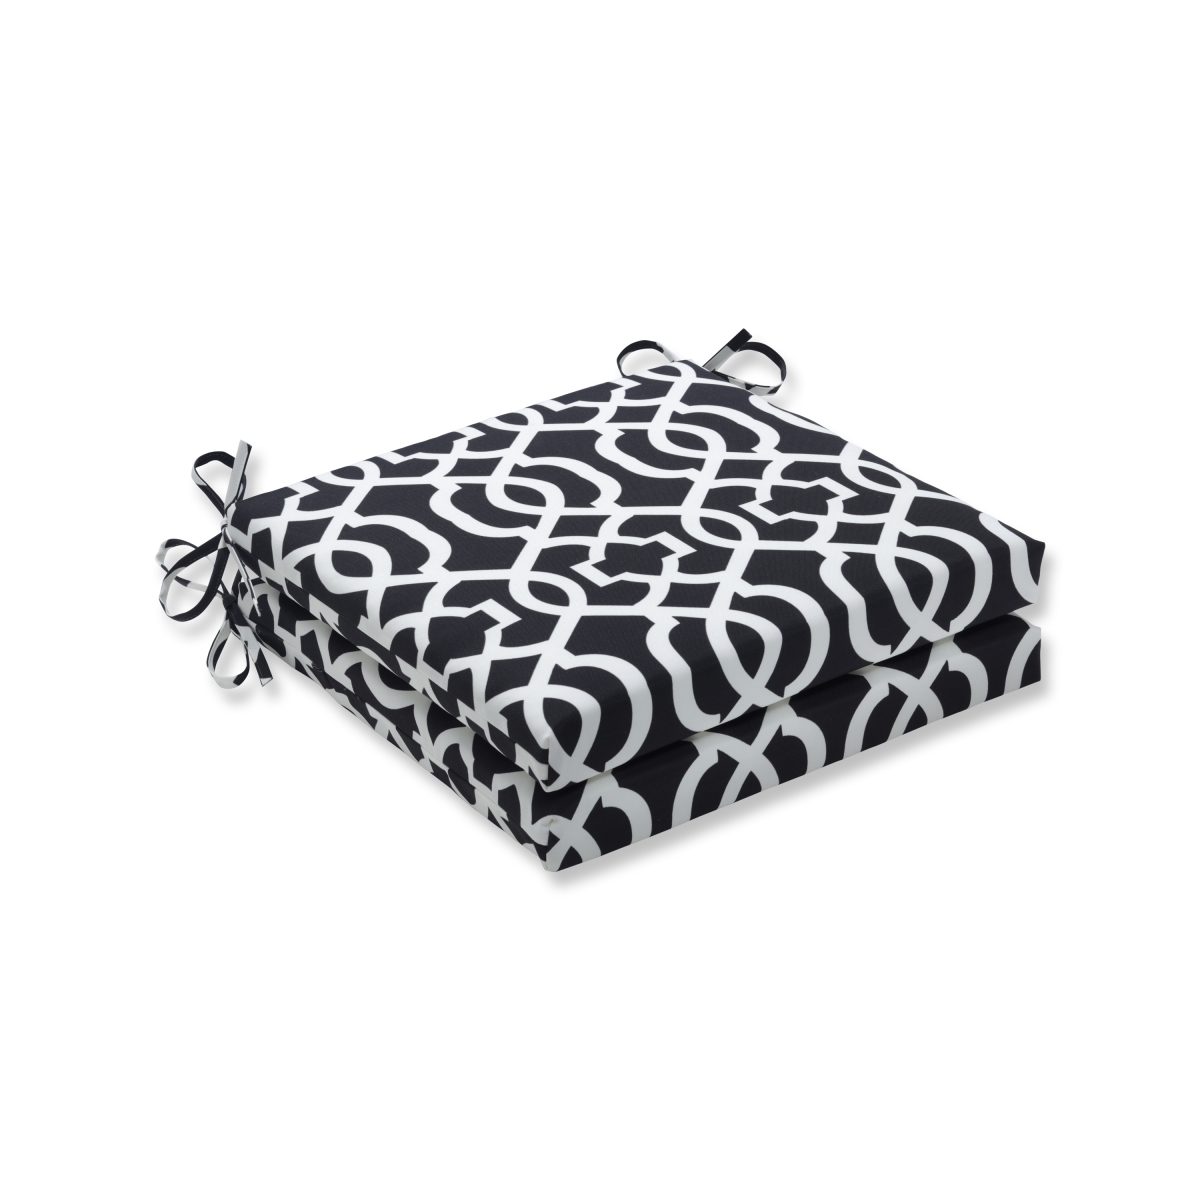 20 X 20 X 3 In. Outdoor & Indoor New Geo Squared Corners Seat Cushion, Black & White - Set Of 2